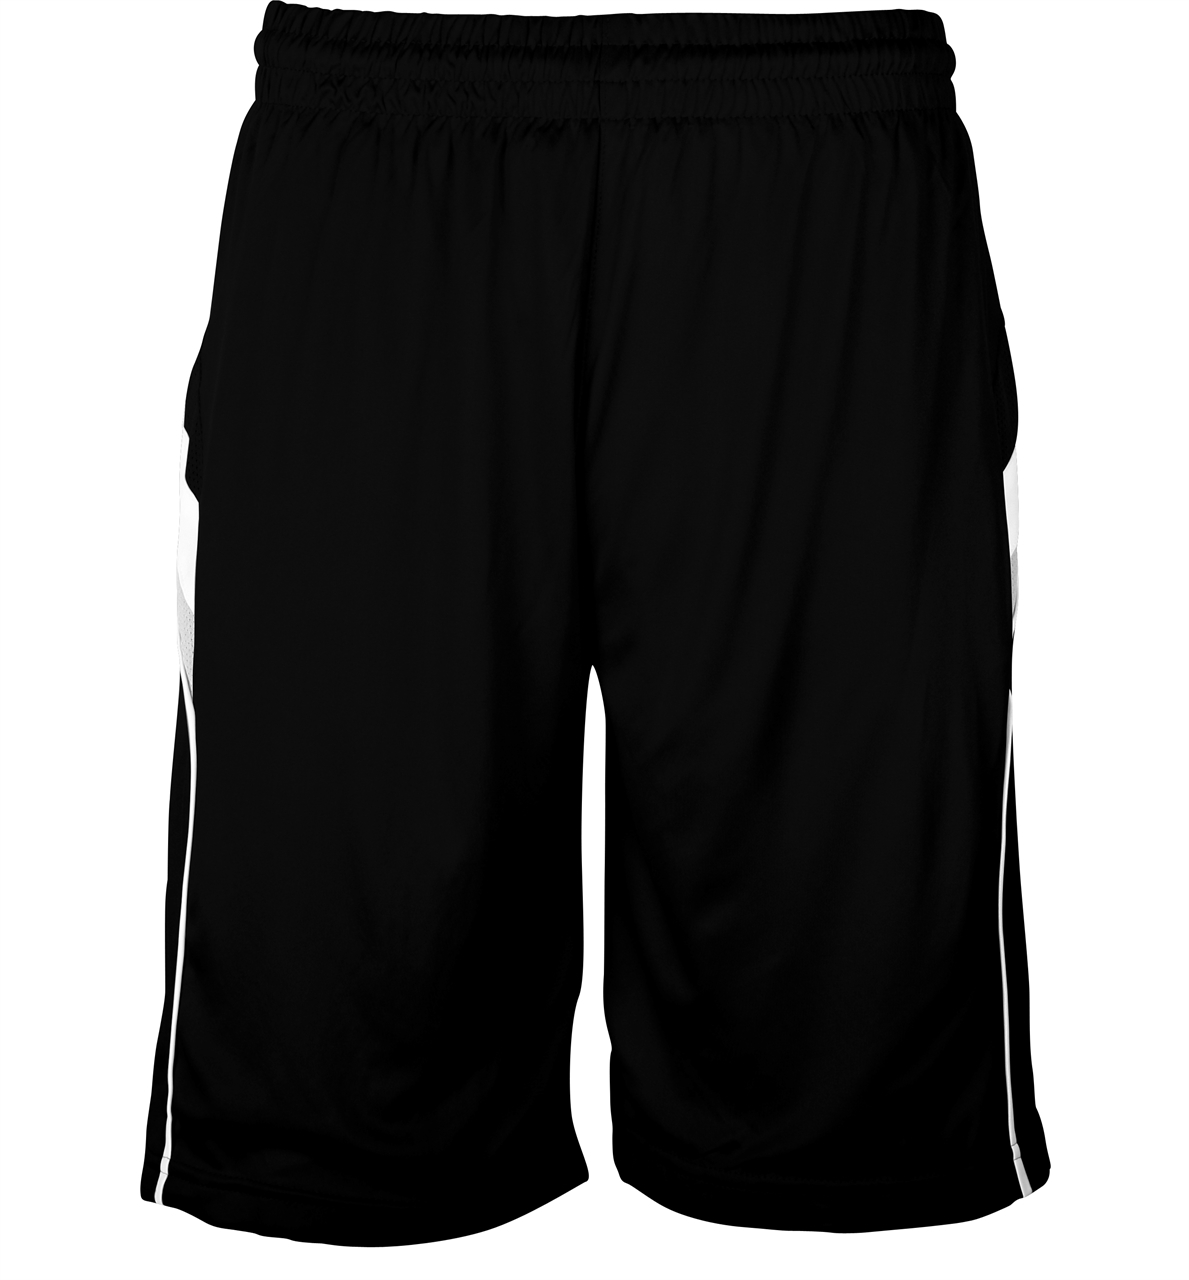 Picture of N3 Sport Dry Fit Basketball Shorts